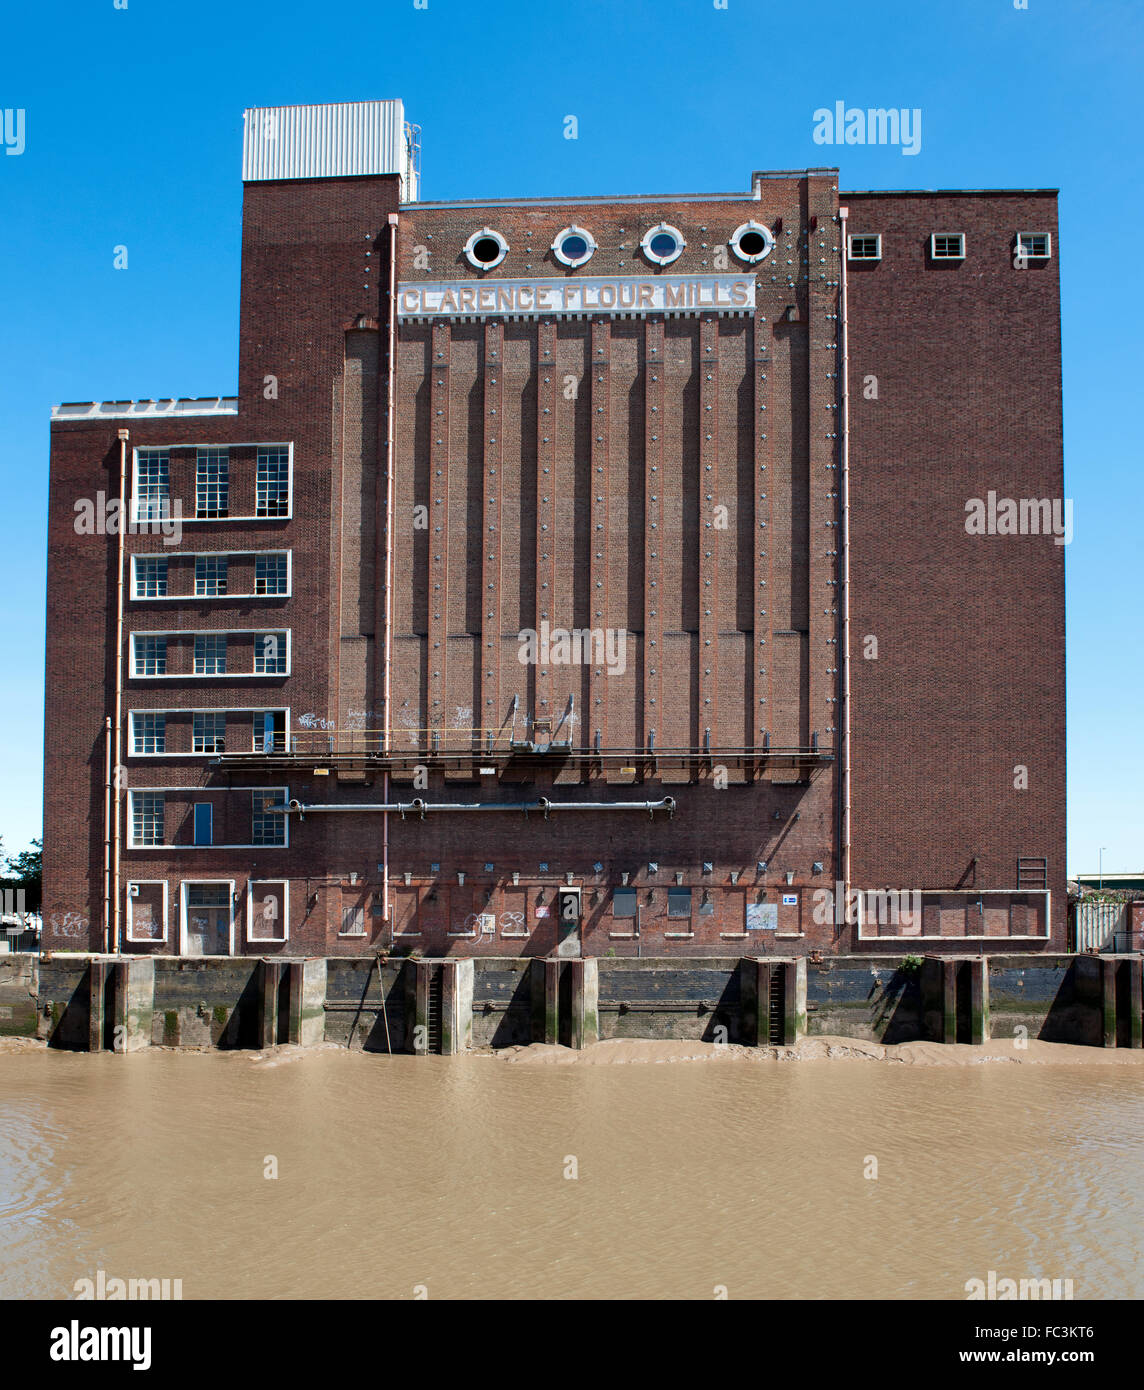 Clarence Flour Mill, beside River Hull, Hull, Yorkshire, England, UK Stock Photo